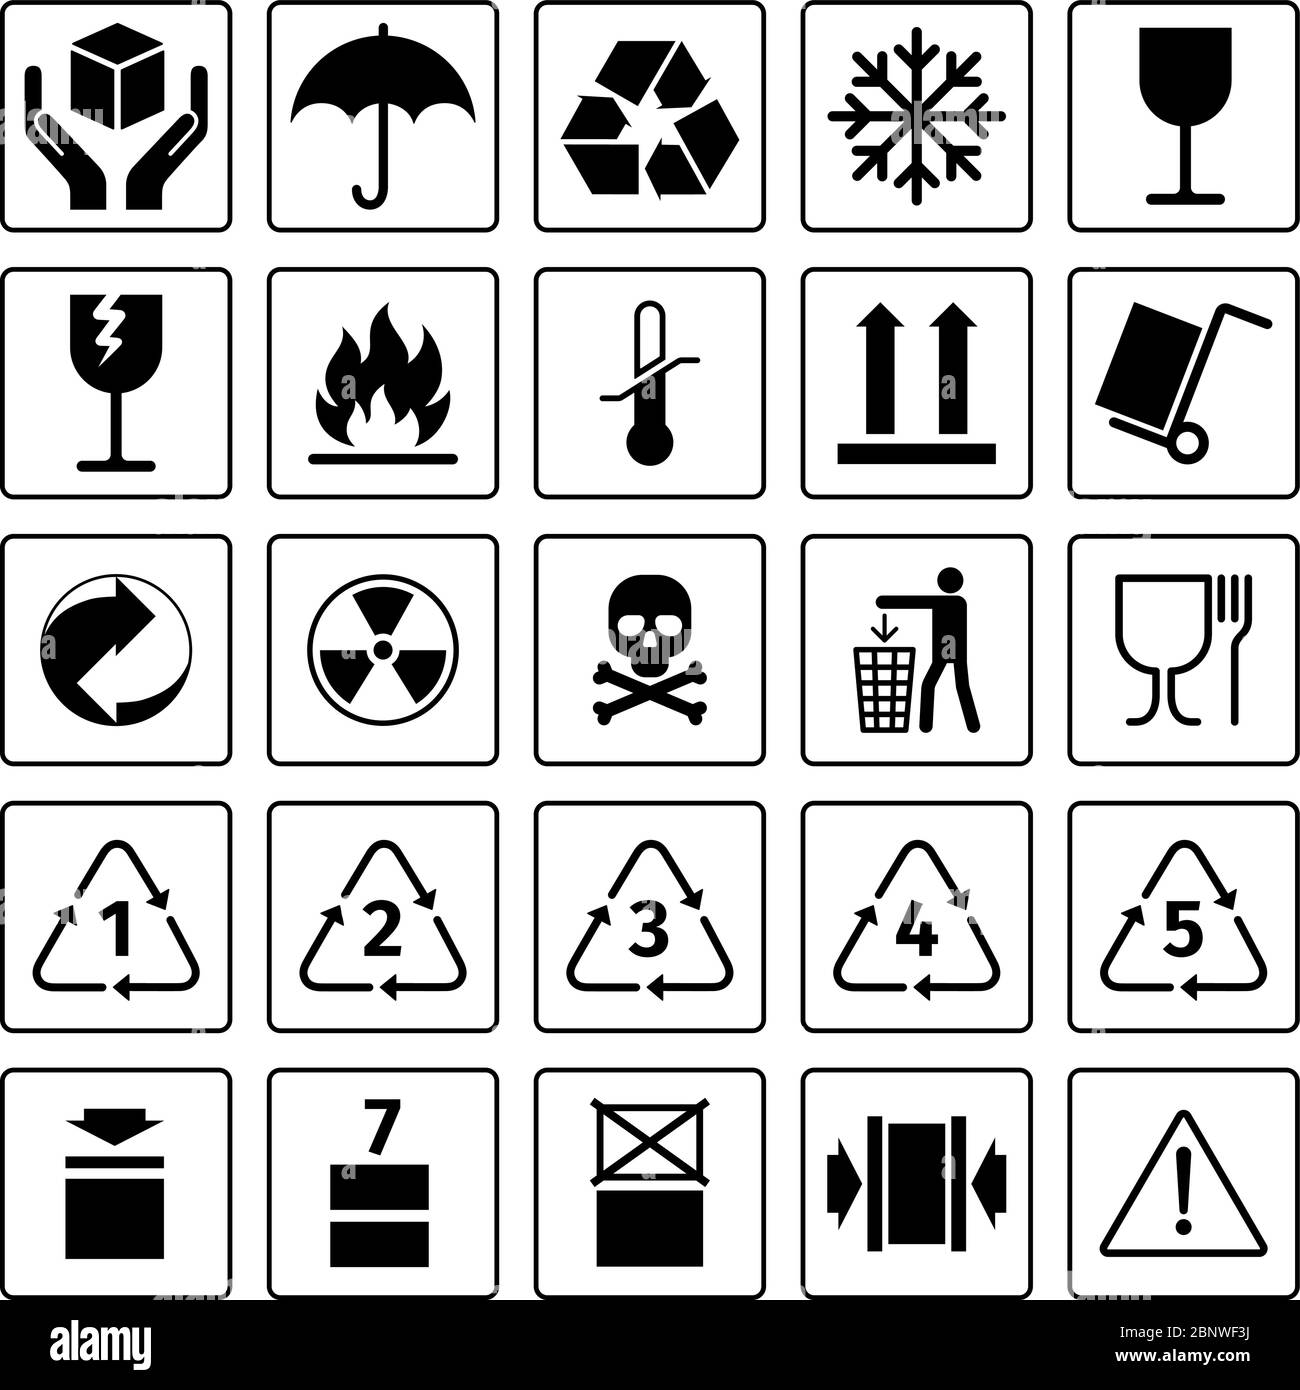 Packaging symbols. Vector package icons with waste recycling and fragile, flammable and this side up symbols Stock Vector